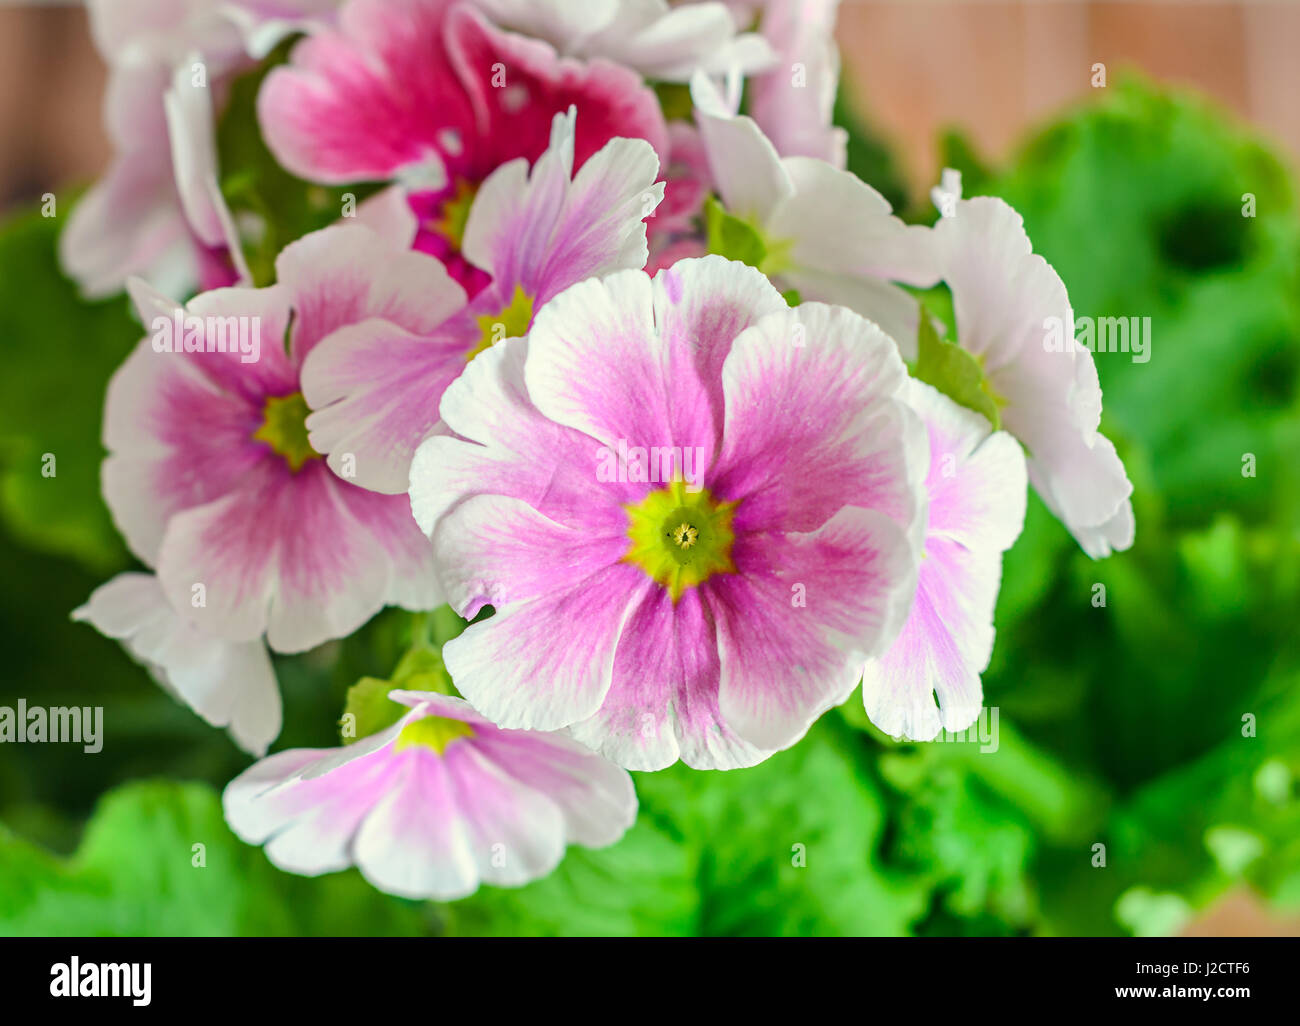 Primula obconica touch me, pink with white flowers, green leaves, close up, wood background Stock Photo